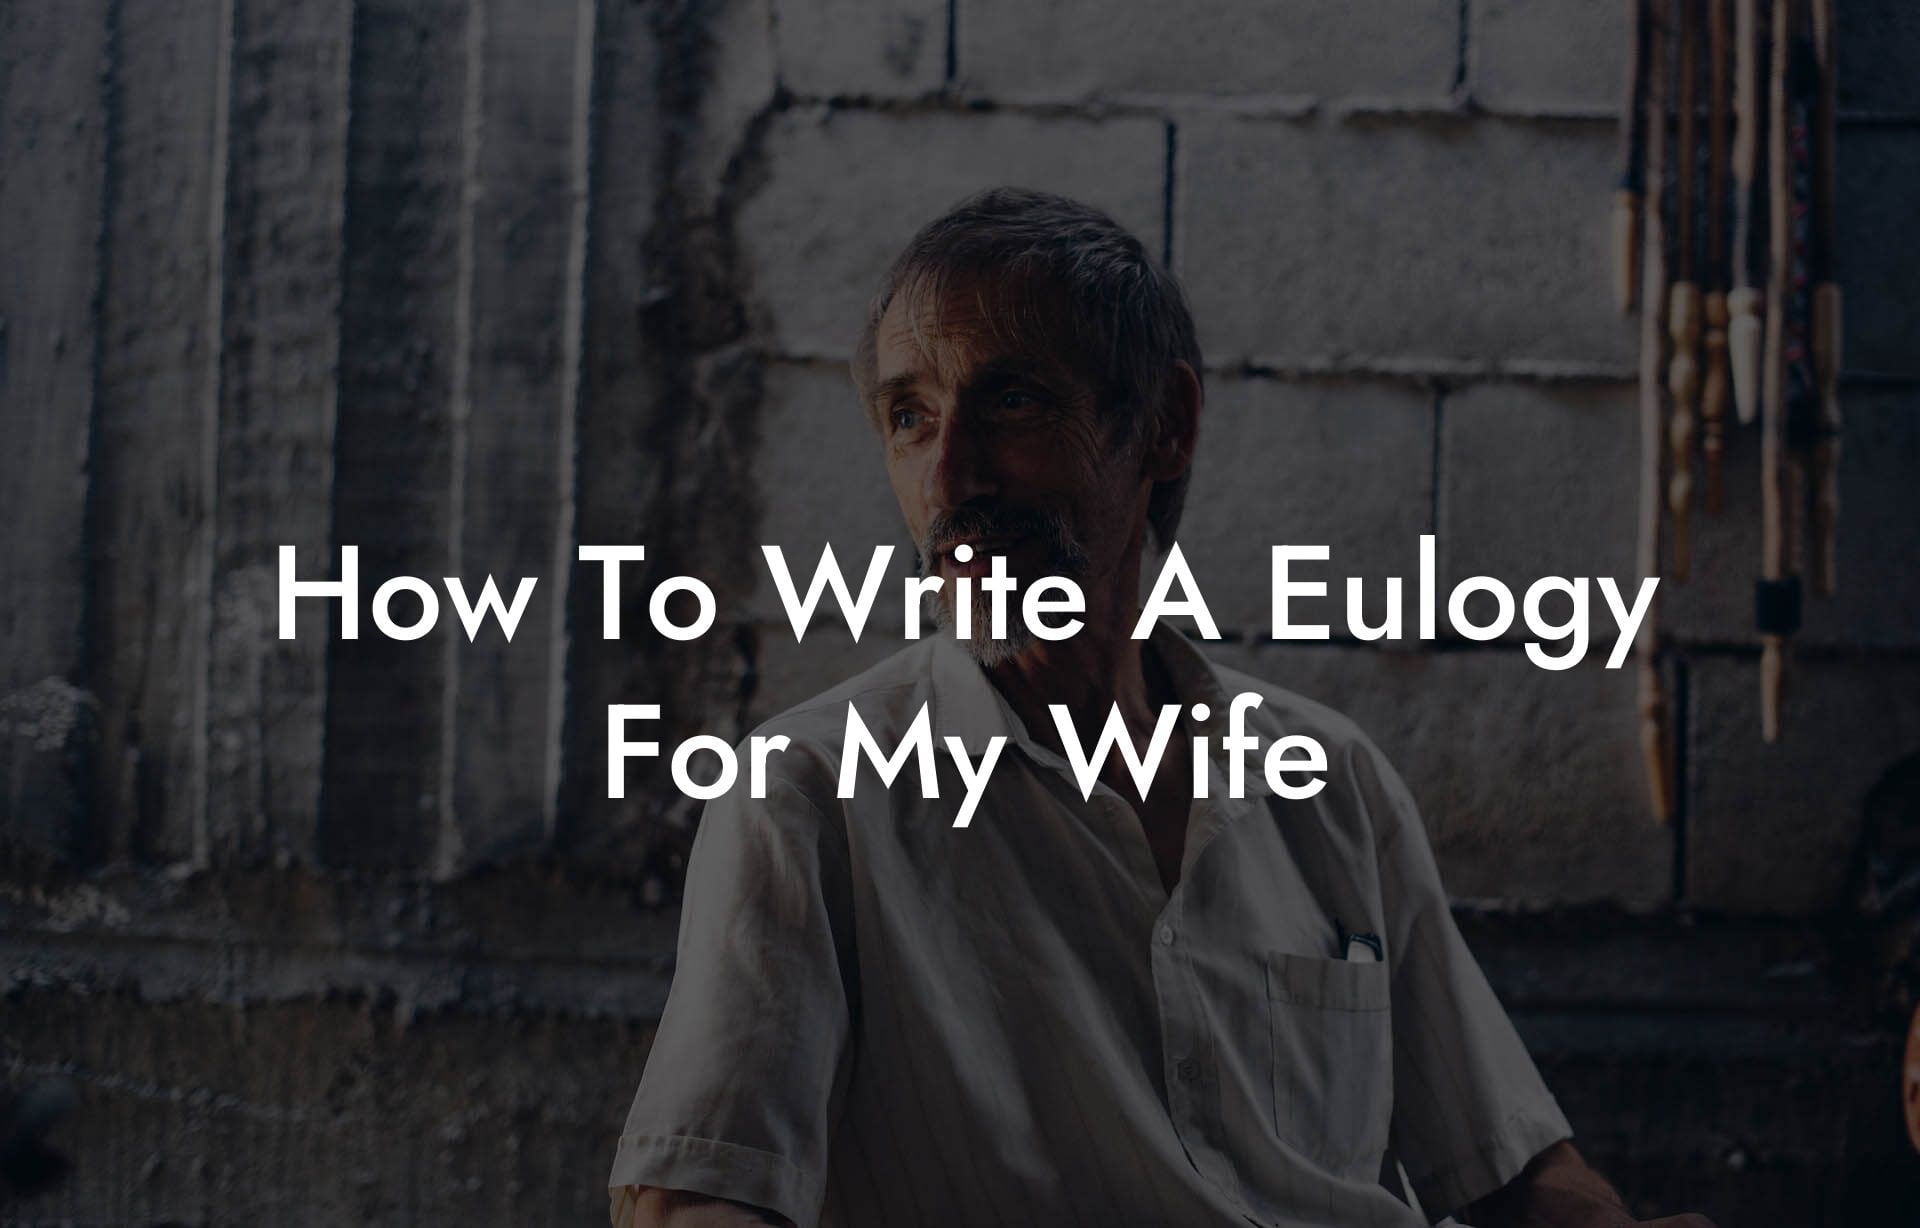 How To Write A Eulogy For My Wife